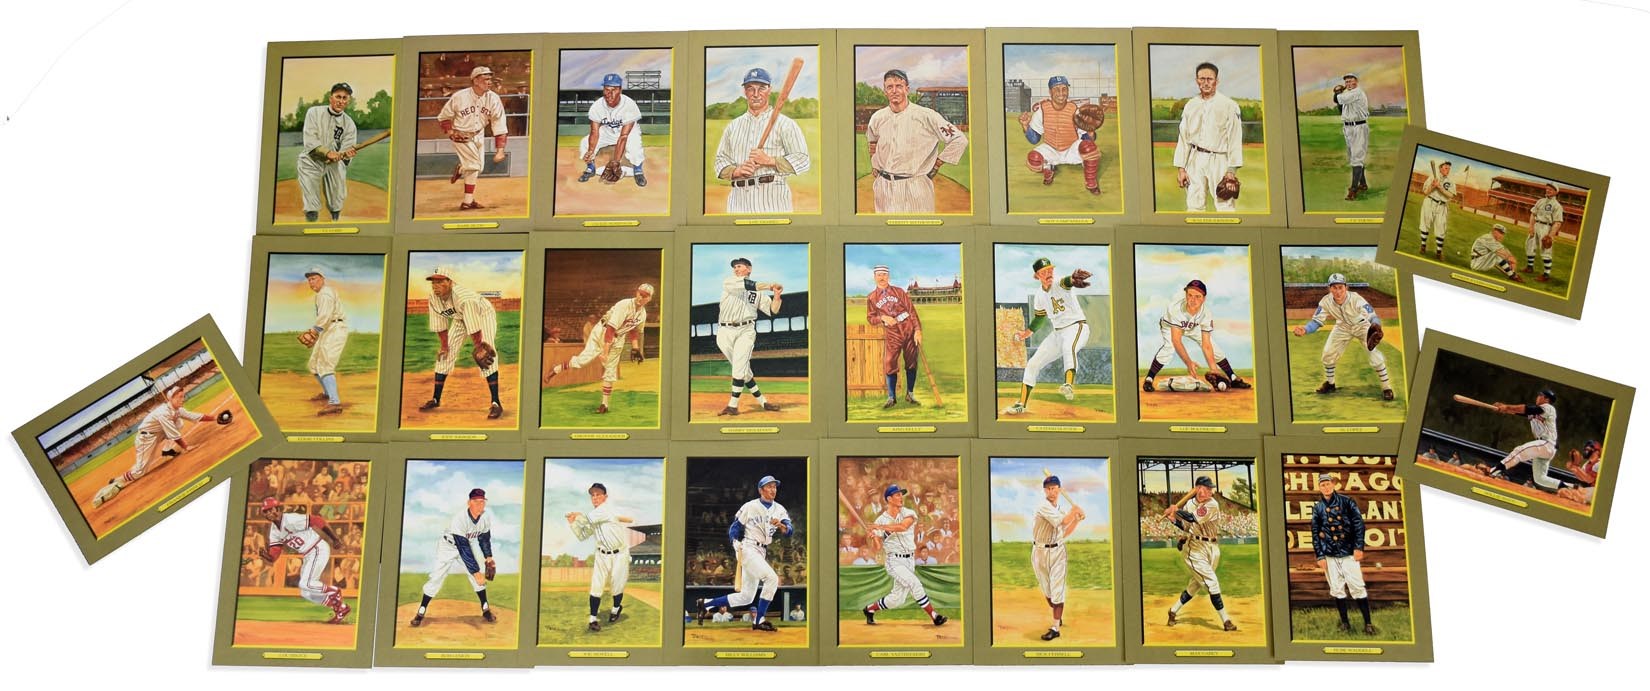 Baseball and Trading Cards - Vintage Perez-Steele Baseball Cards & Complete Sets (4,000+)